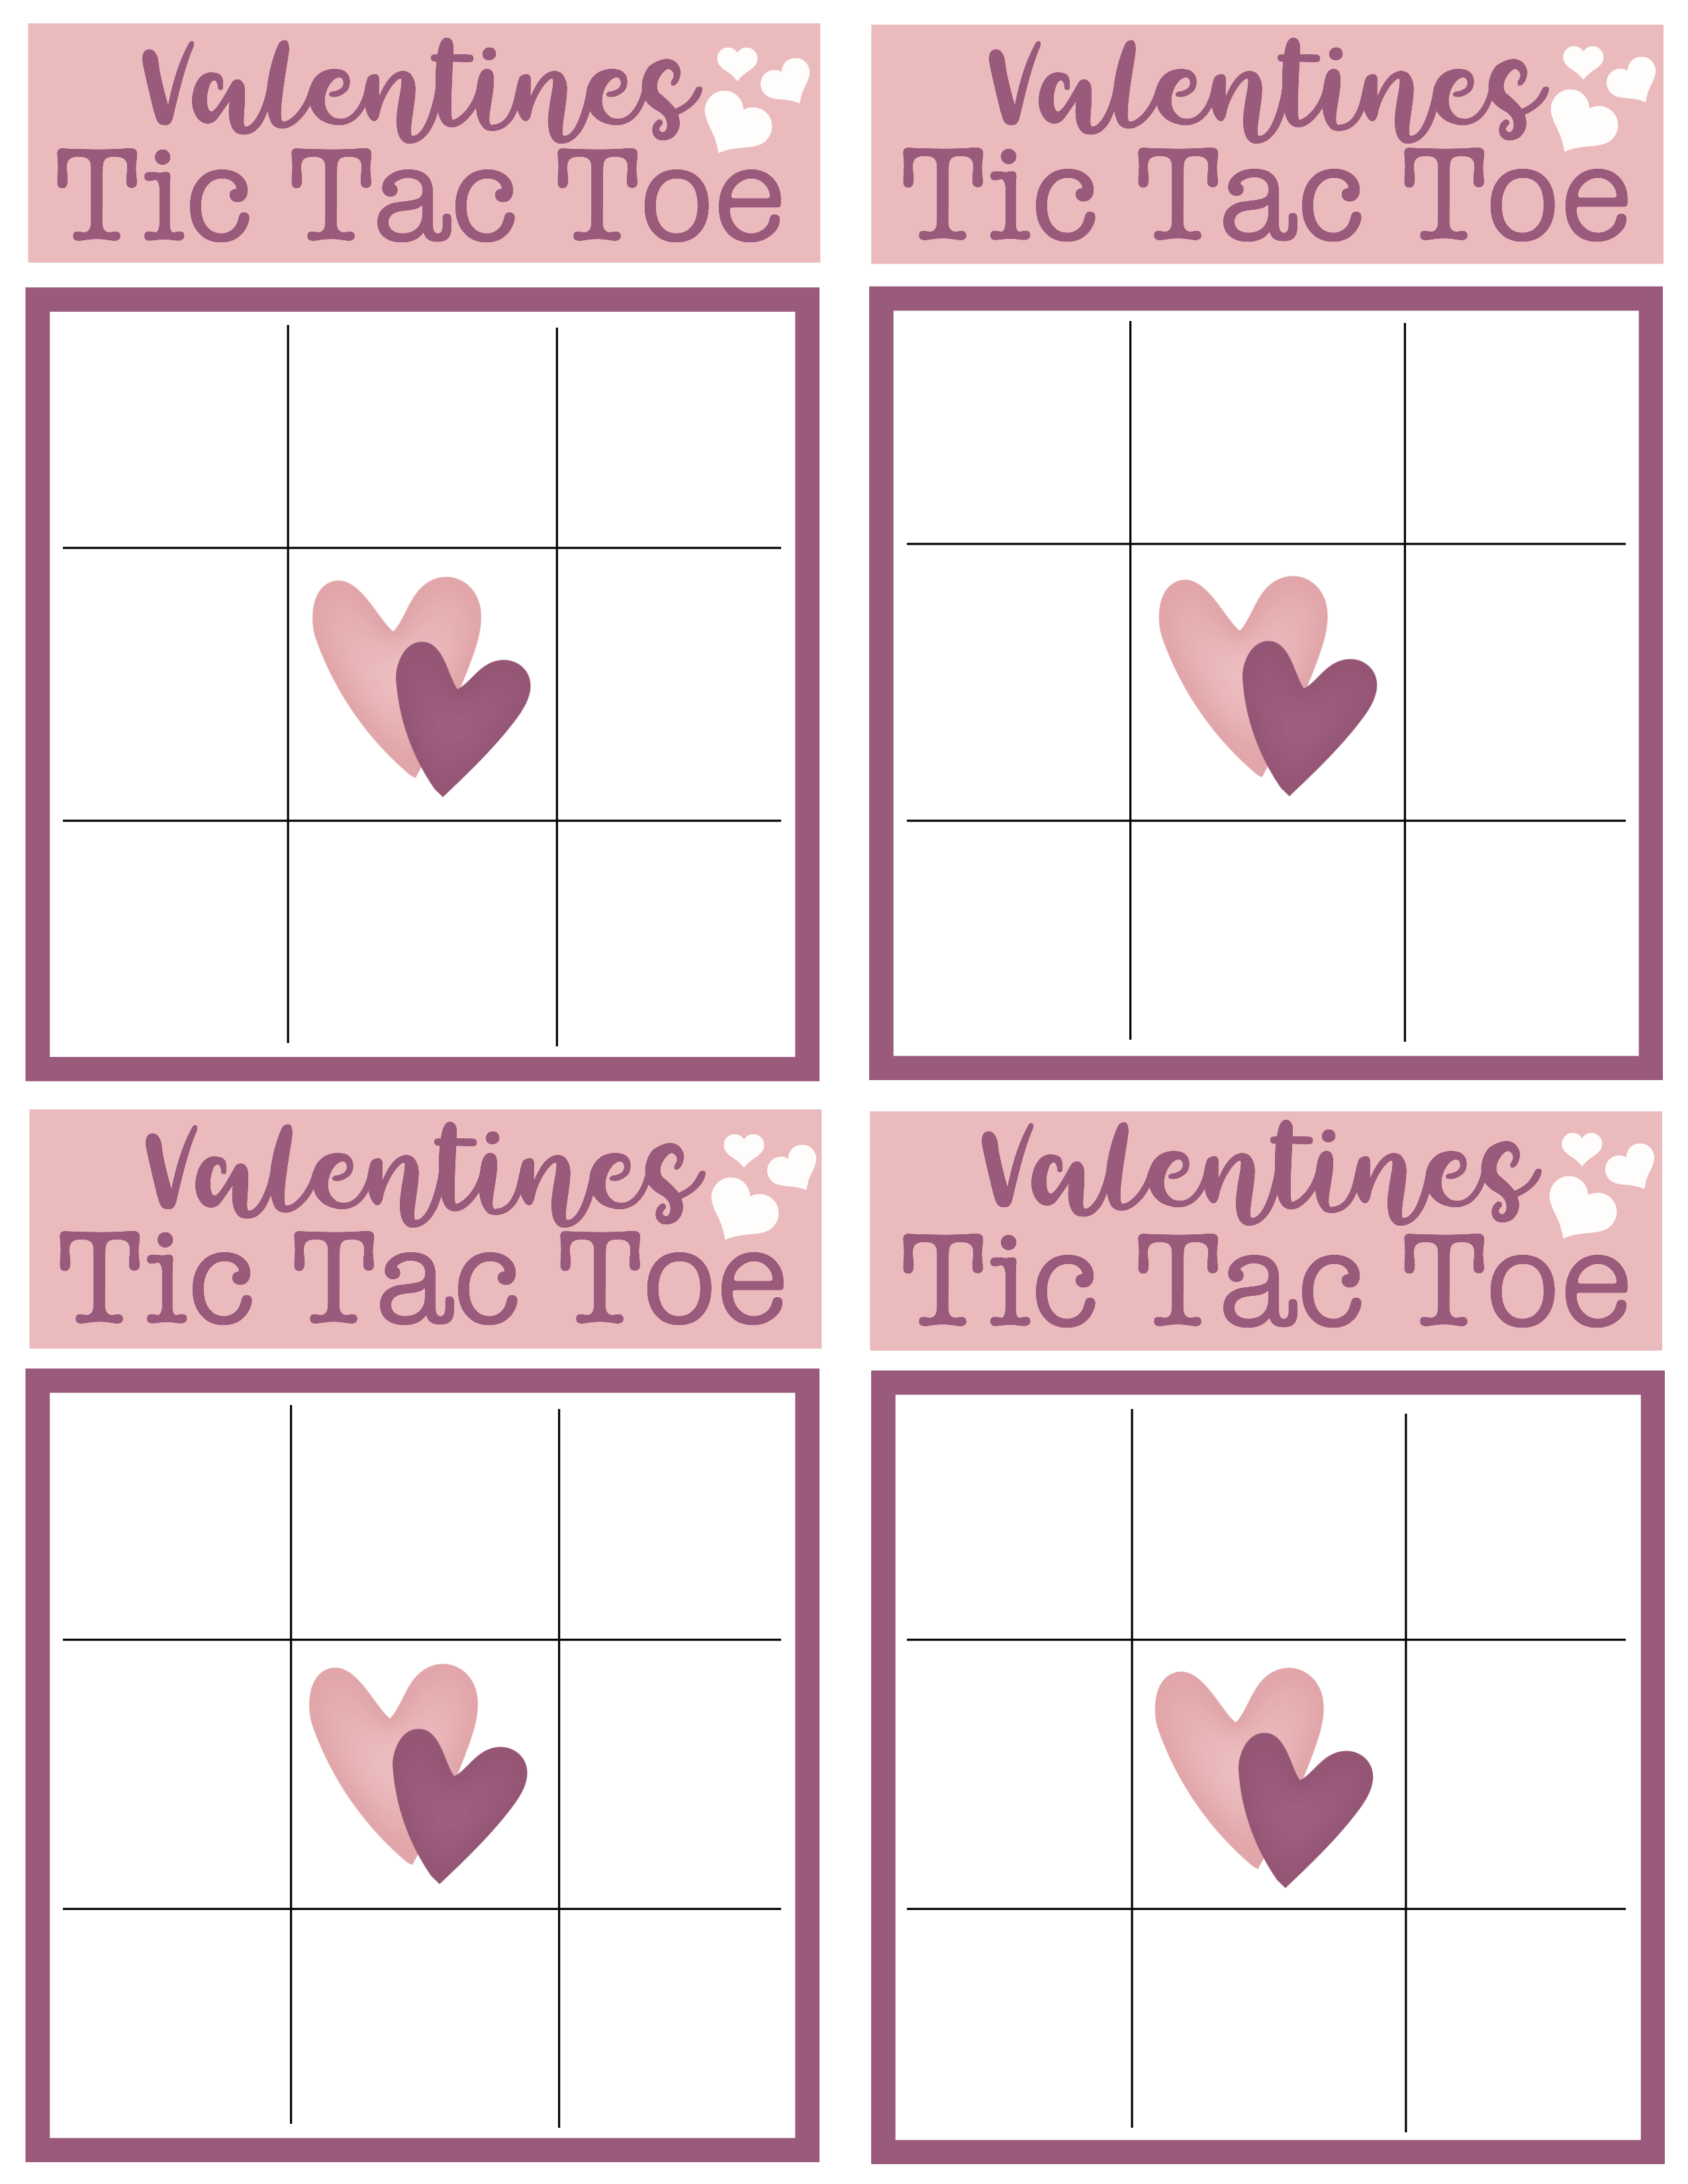 Valentines Tic Tac Toe Printable | Simply Being Mommy